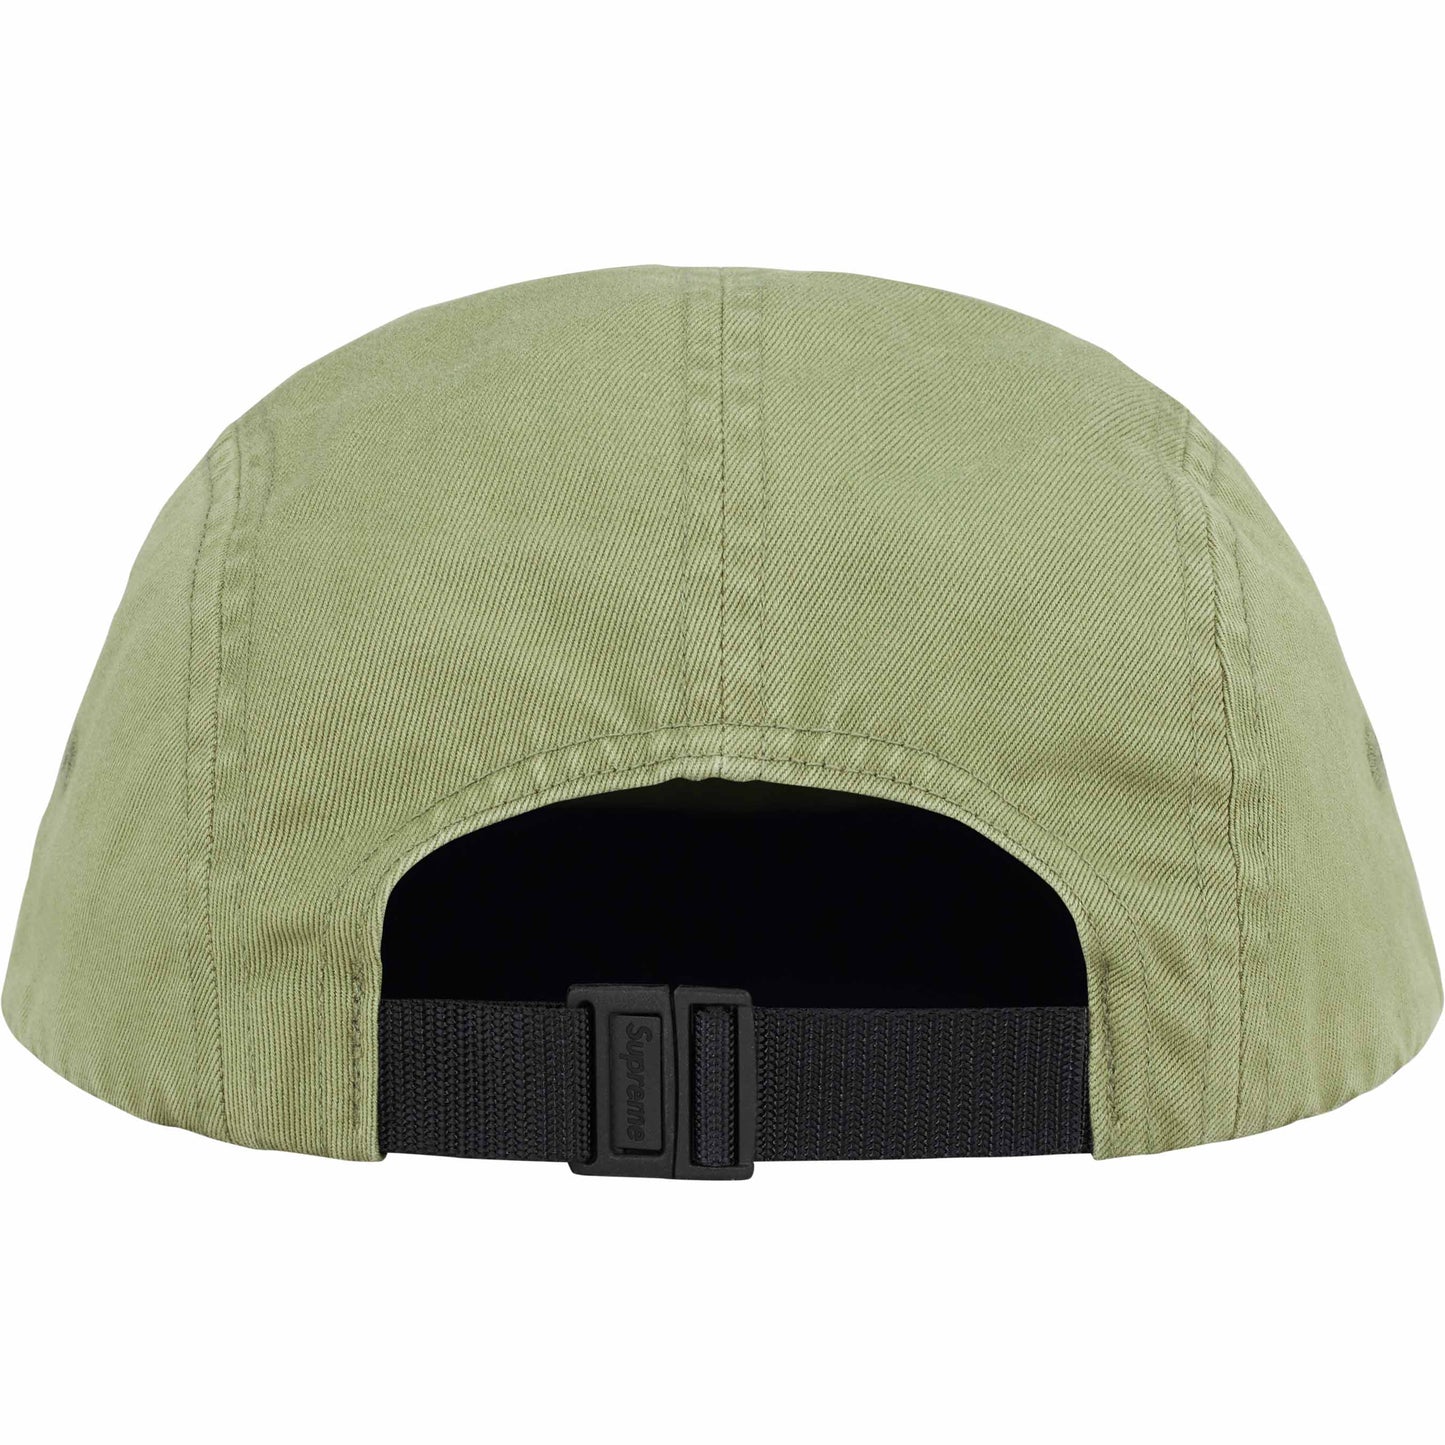 Supreme Washed Chino Twill Camp Cap "Light Olive"